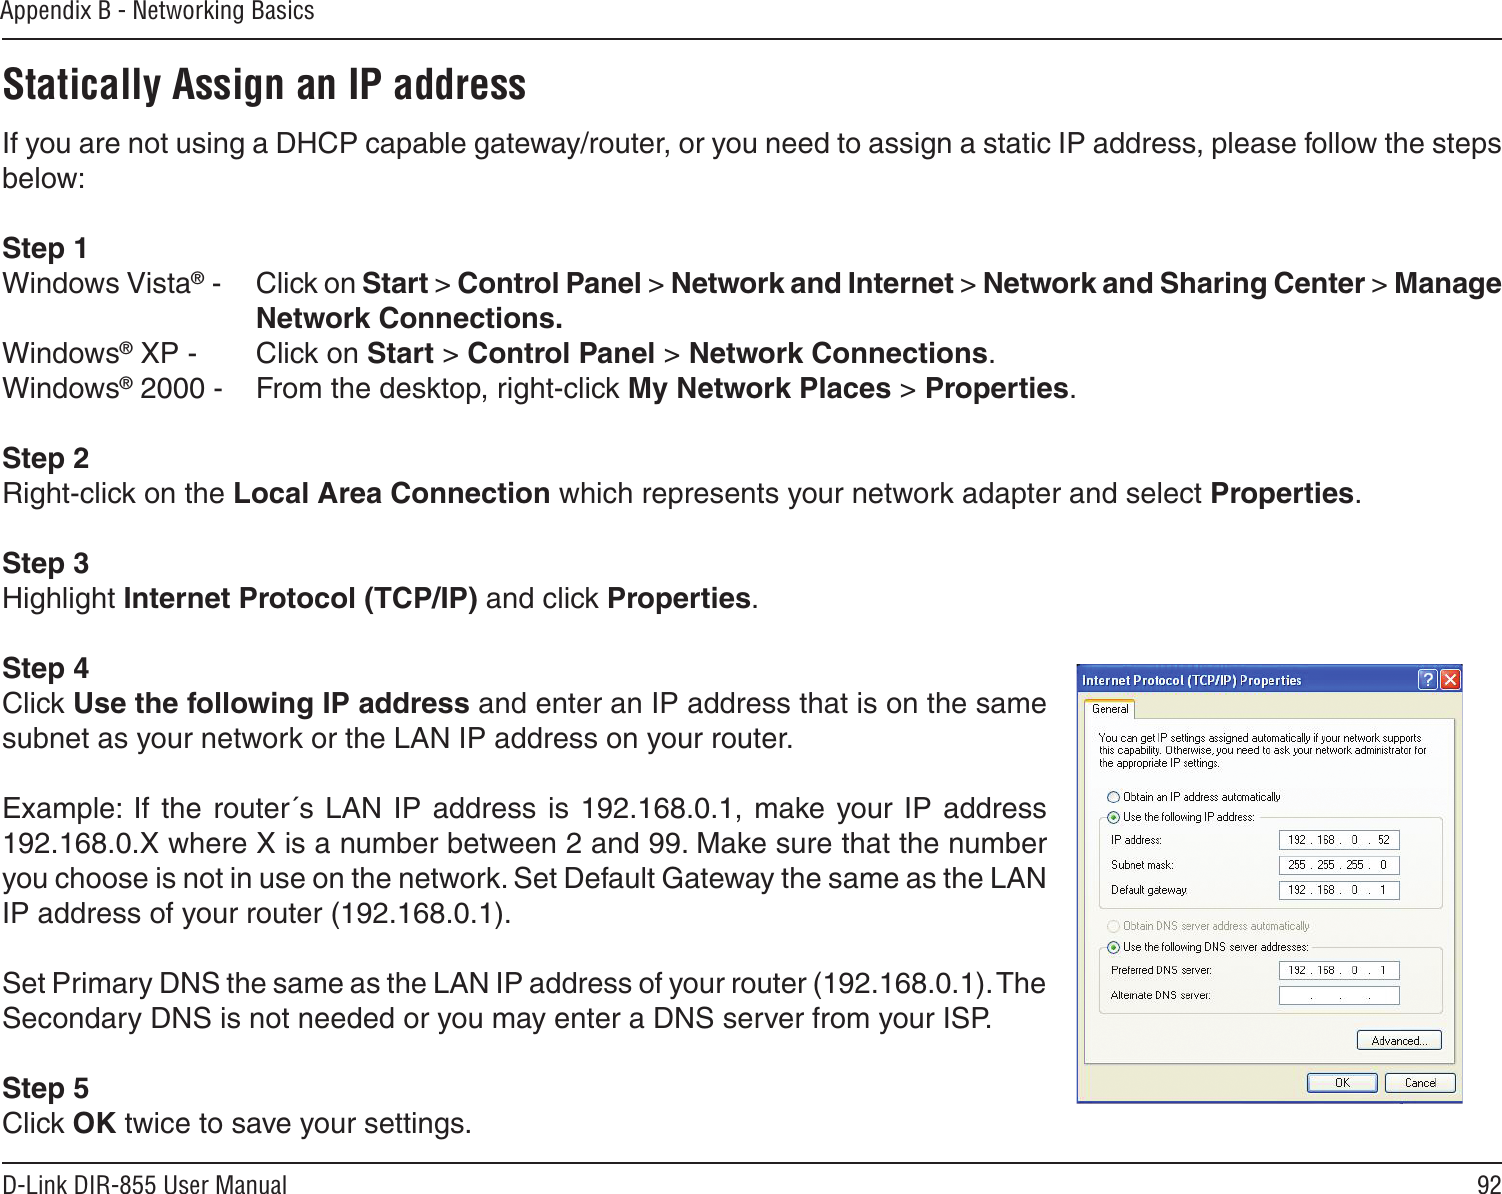 92D-Link DIR-855 User ManualAppendix B - Networking BasicsStatically Assign an IP addressIf you are not using a DHCP capable gateway/router, or you need to assign a static IP address, please follow the steps below:Step 1Windows Vista® -  Click on Start &gt; Control Panel &gt; Network and Internet &gt; Network and Sharing Center &gt; Manage Network Connections.Windows® XP -  Click on Start &gt; Control Panel &gt; Network Connections.Windows® 2000 -  From the desktop, right-click My Network Places &gt; Properties.Step 2Right-click on the Local Area Connection which represents your network adapter and select Properties.Step 3Highlight Internet Protocol (TCP/IP) and click Properties.Step 4Click Use the following IP address and enter an IP address that is on the same subnet as your network or the LAN IP address on your router. Example: If the router´s LAN IP address is 192.168.0.1, make  your IP address 192.168.0.X where X is a number between 2 and 99. Make sure that the number you choose is not in use on the network. Set Default Gateway the same as the LAN IP address of your router (192.168.0.1). Set Primary DNS the same as the LAN IP address of your router (192.168.0.1). The Secondary DNS is not needed or you may enter a DNS server from your ISP.Step 5Click OK twice to save your settings.